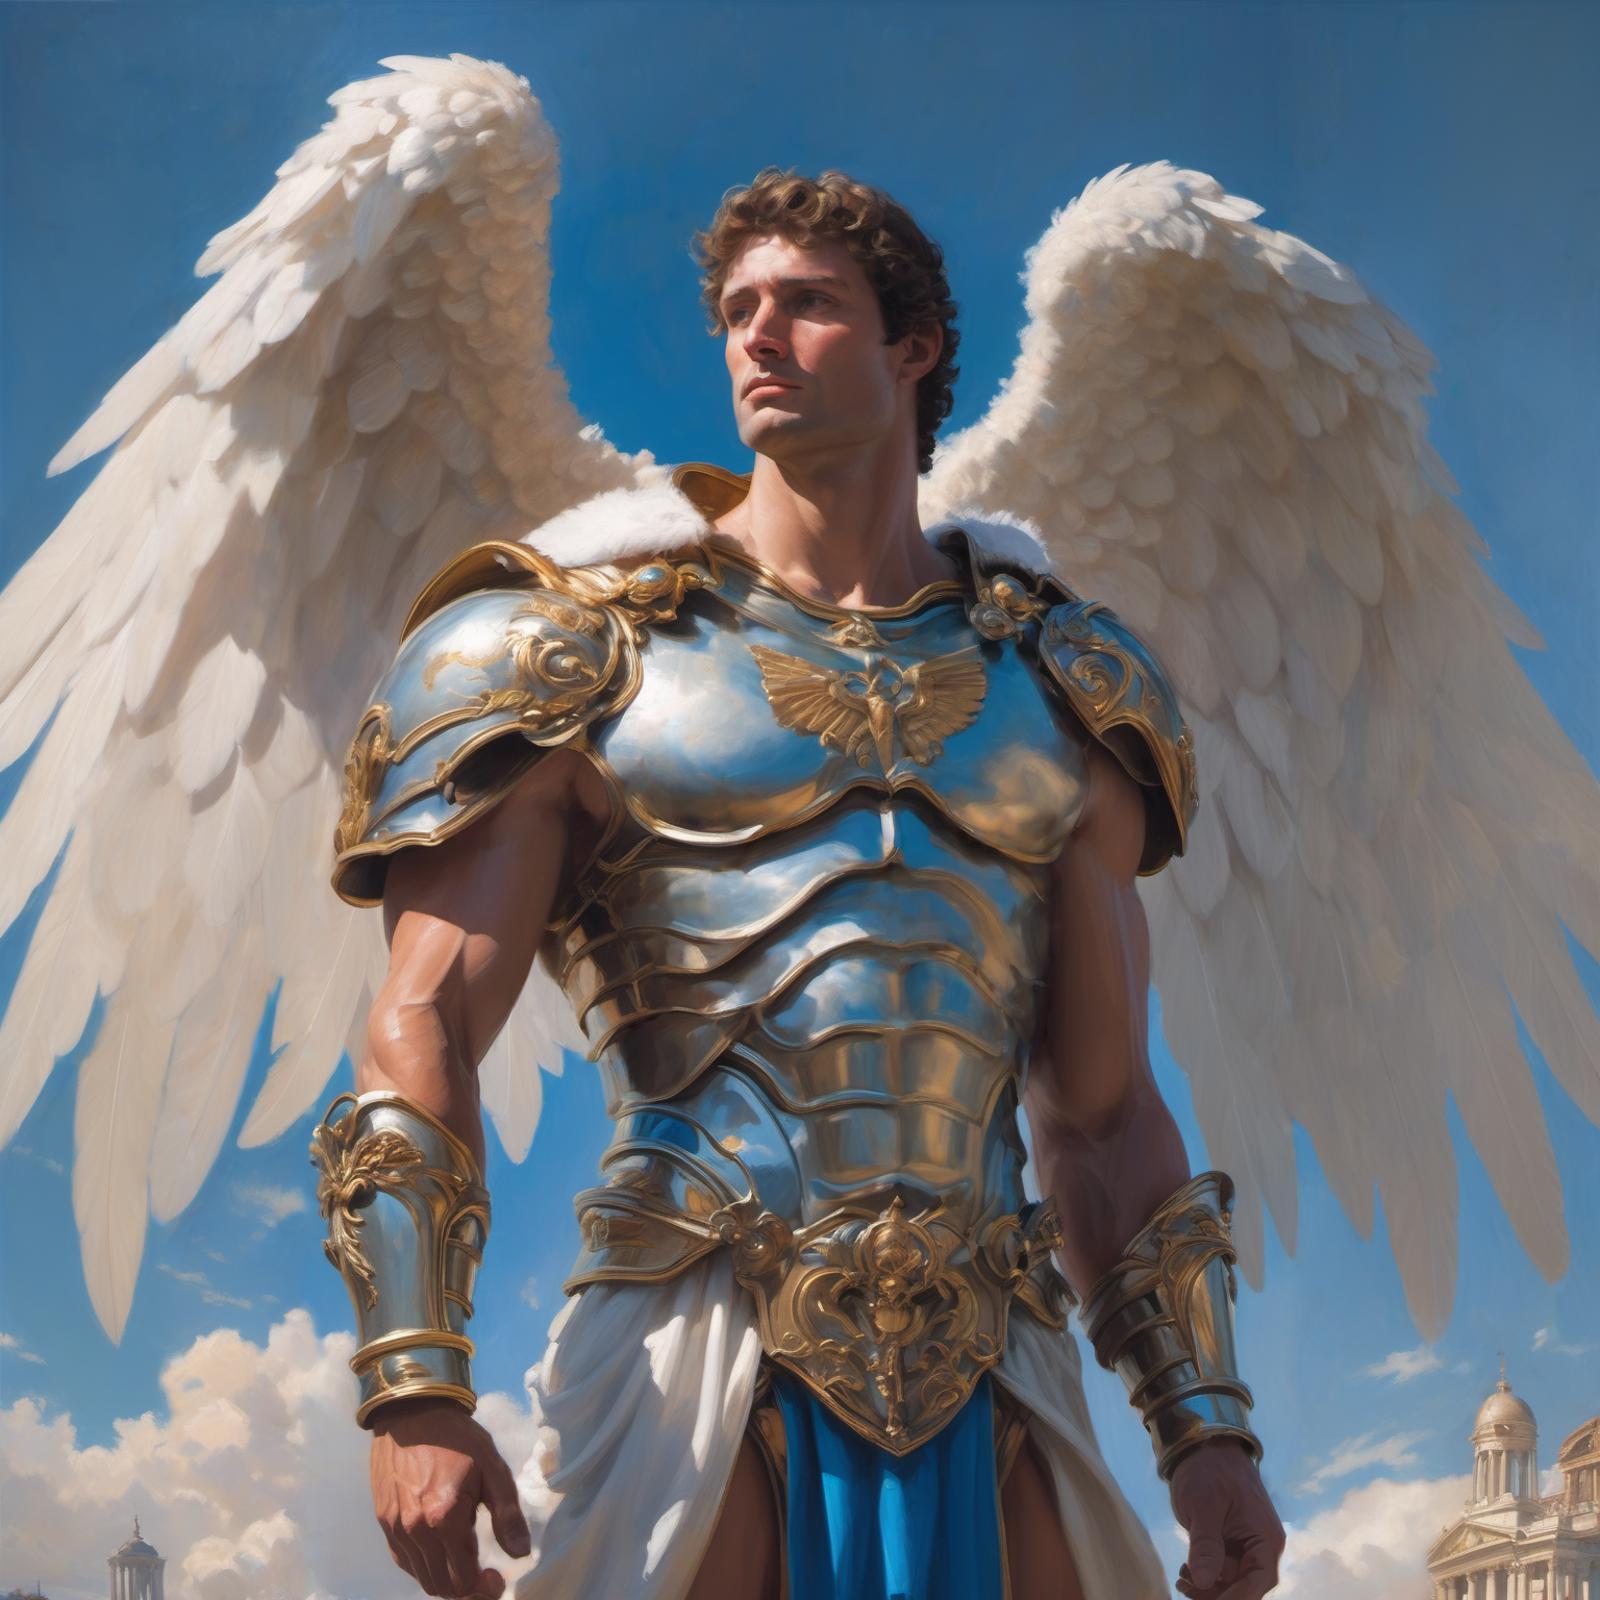 A painting of a muscular man in a gold and white armor, wearing wings and holding a sword.